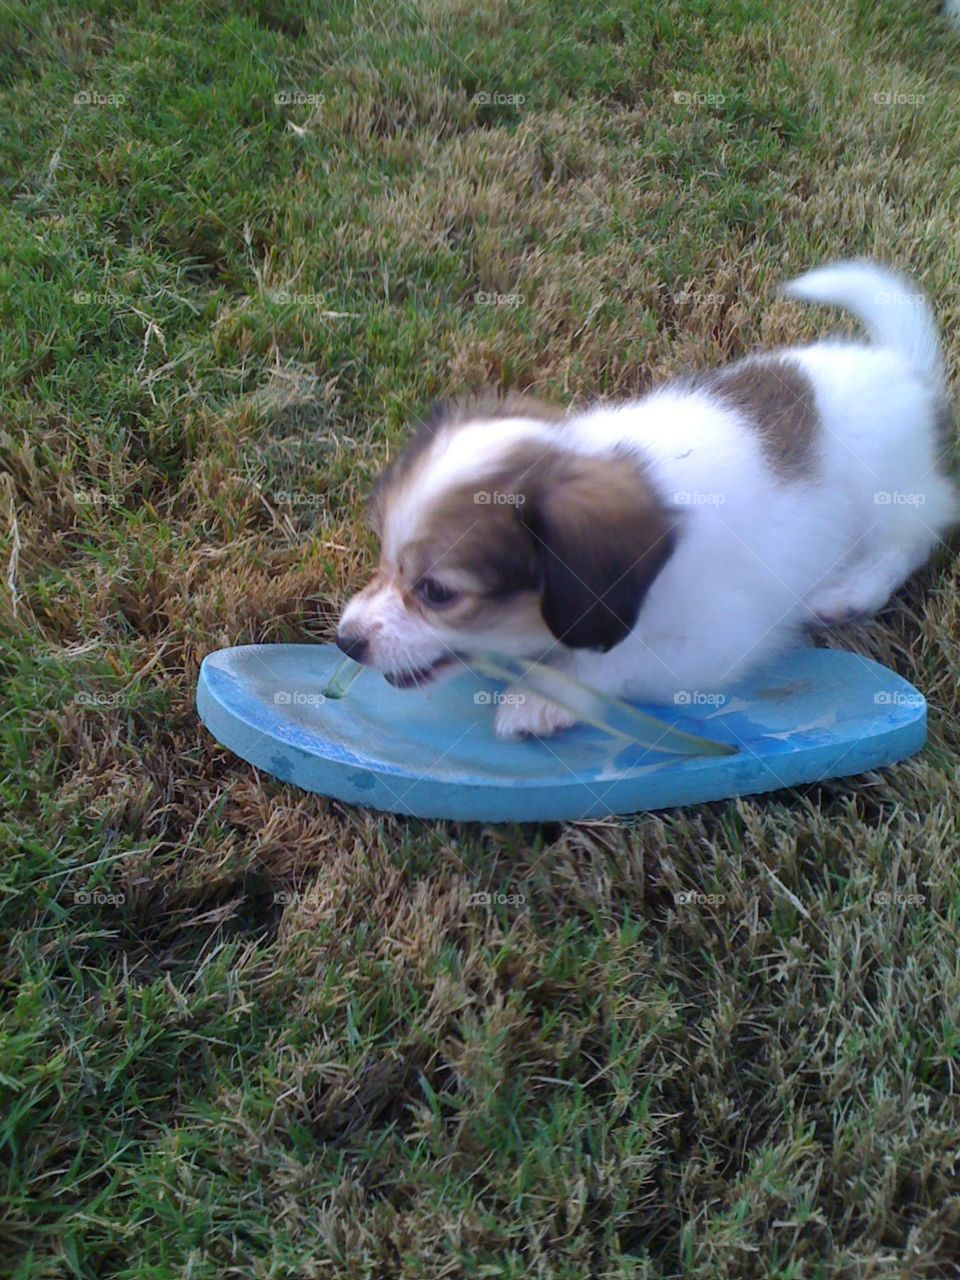 Silly. Puppy chewing on a shoe